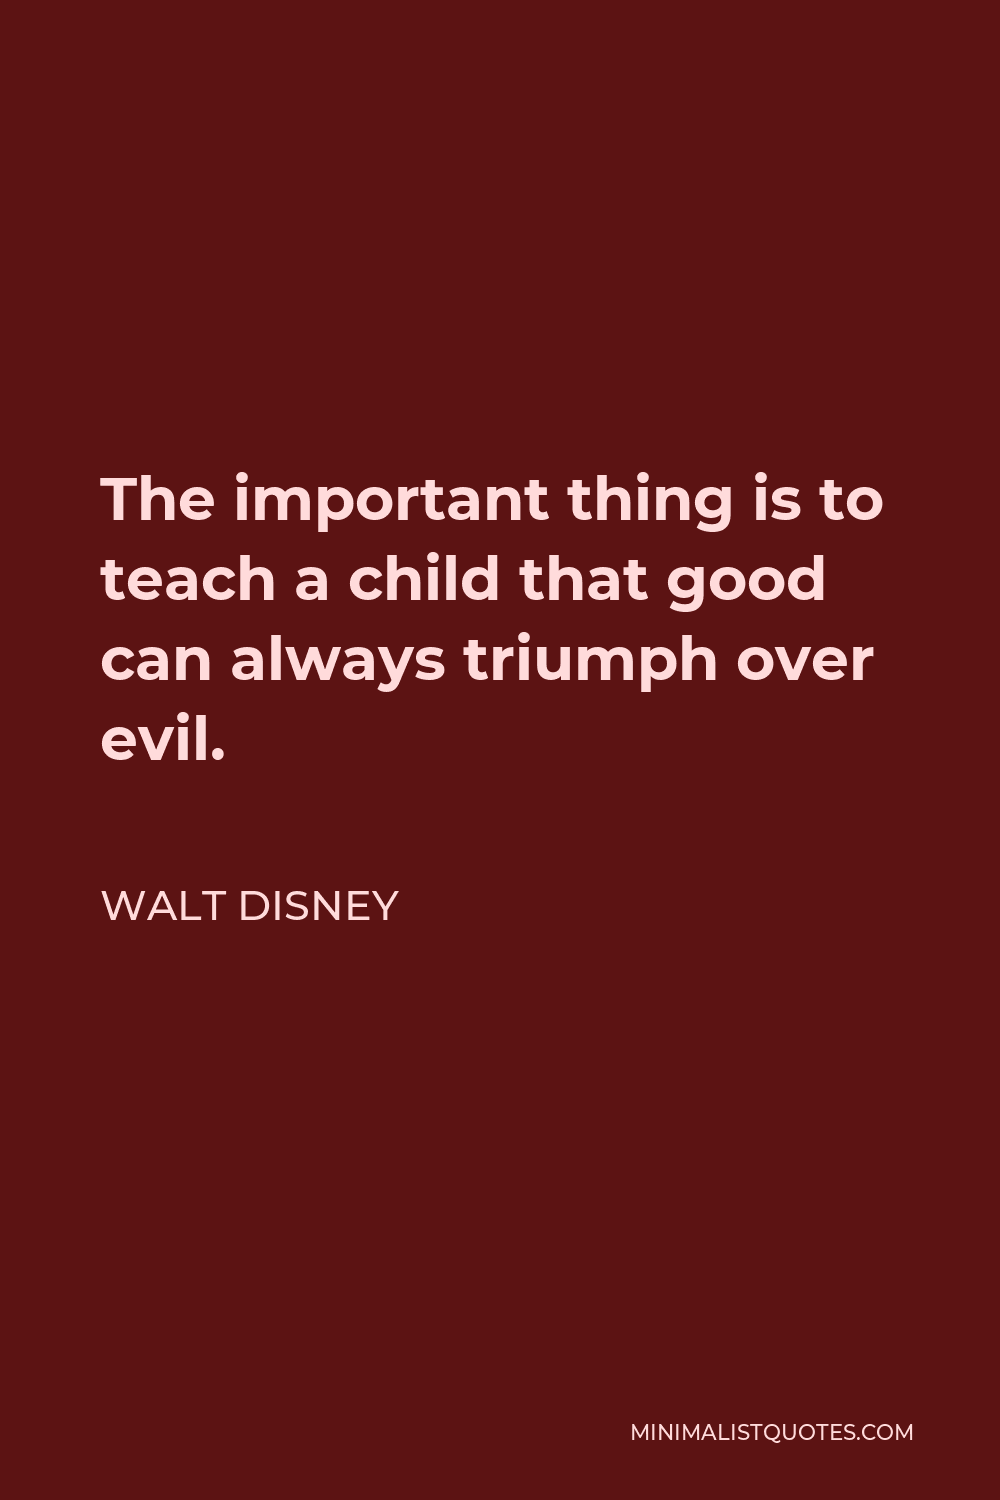 Walt Disney Quote - The important thing is to teach a child that good can always triumph over evil.